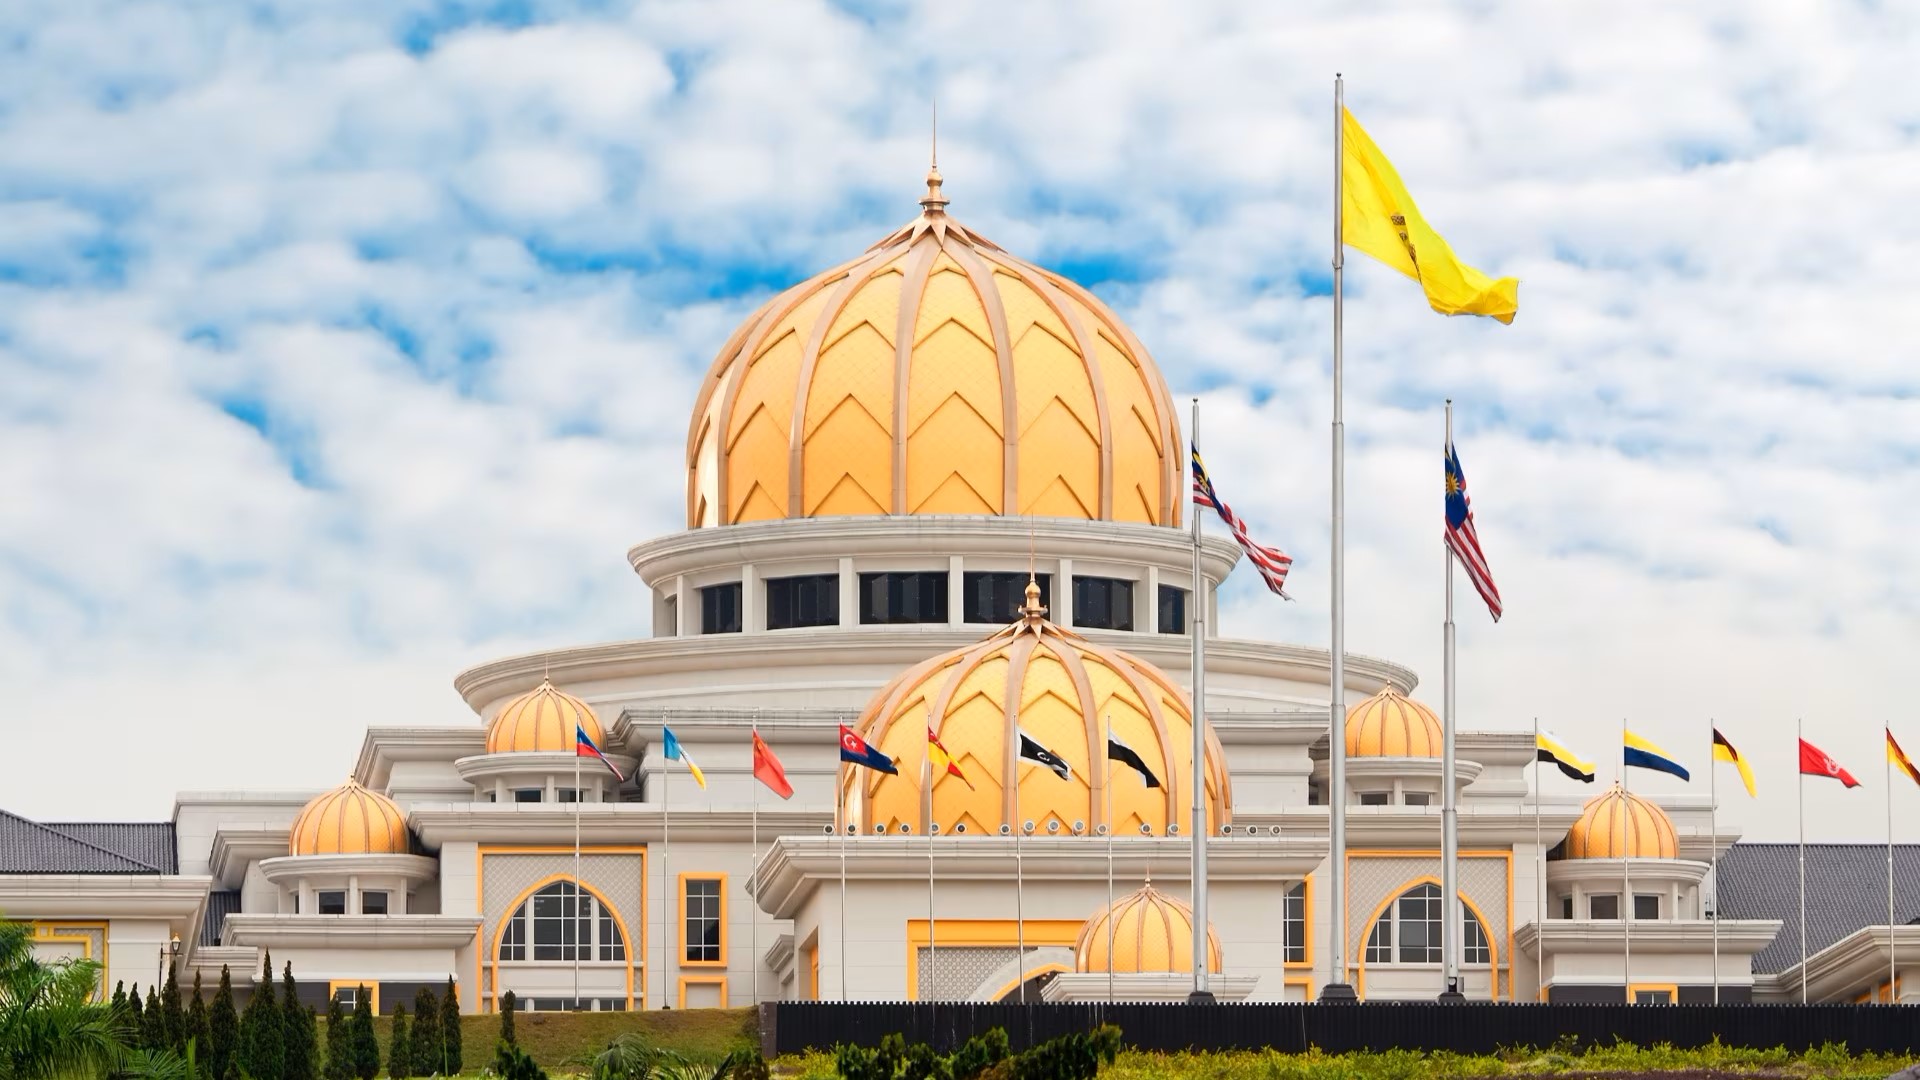 The National Palace of Malaysia